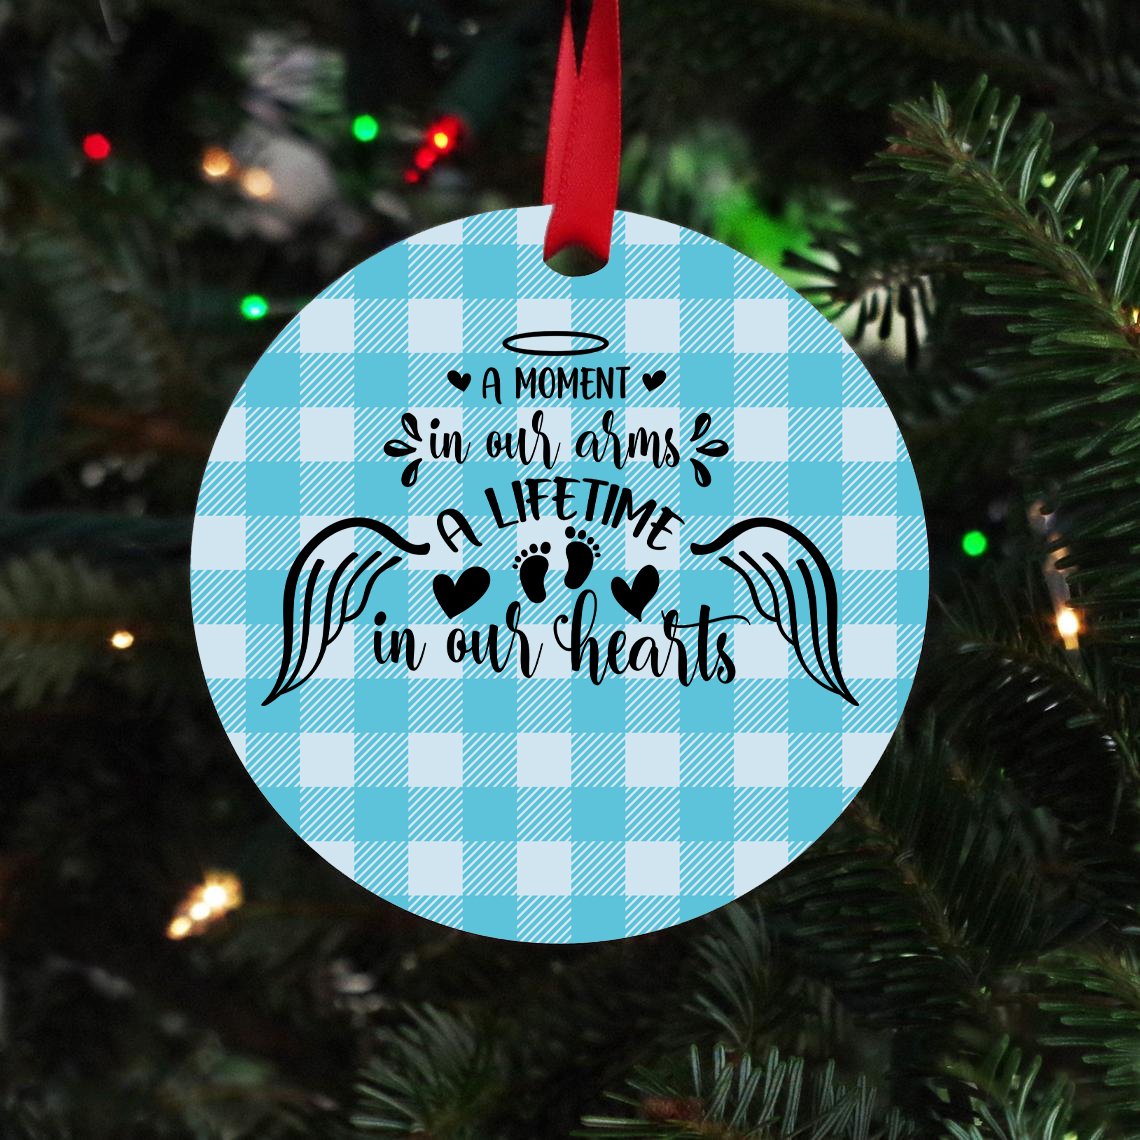 A Moment In Our Arms A Lifetime Hearts (Blue) Christmas Ornament